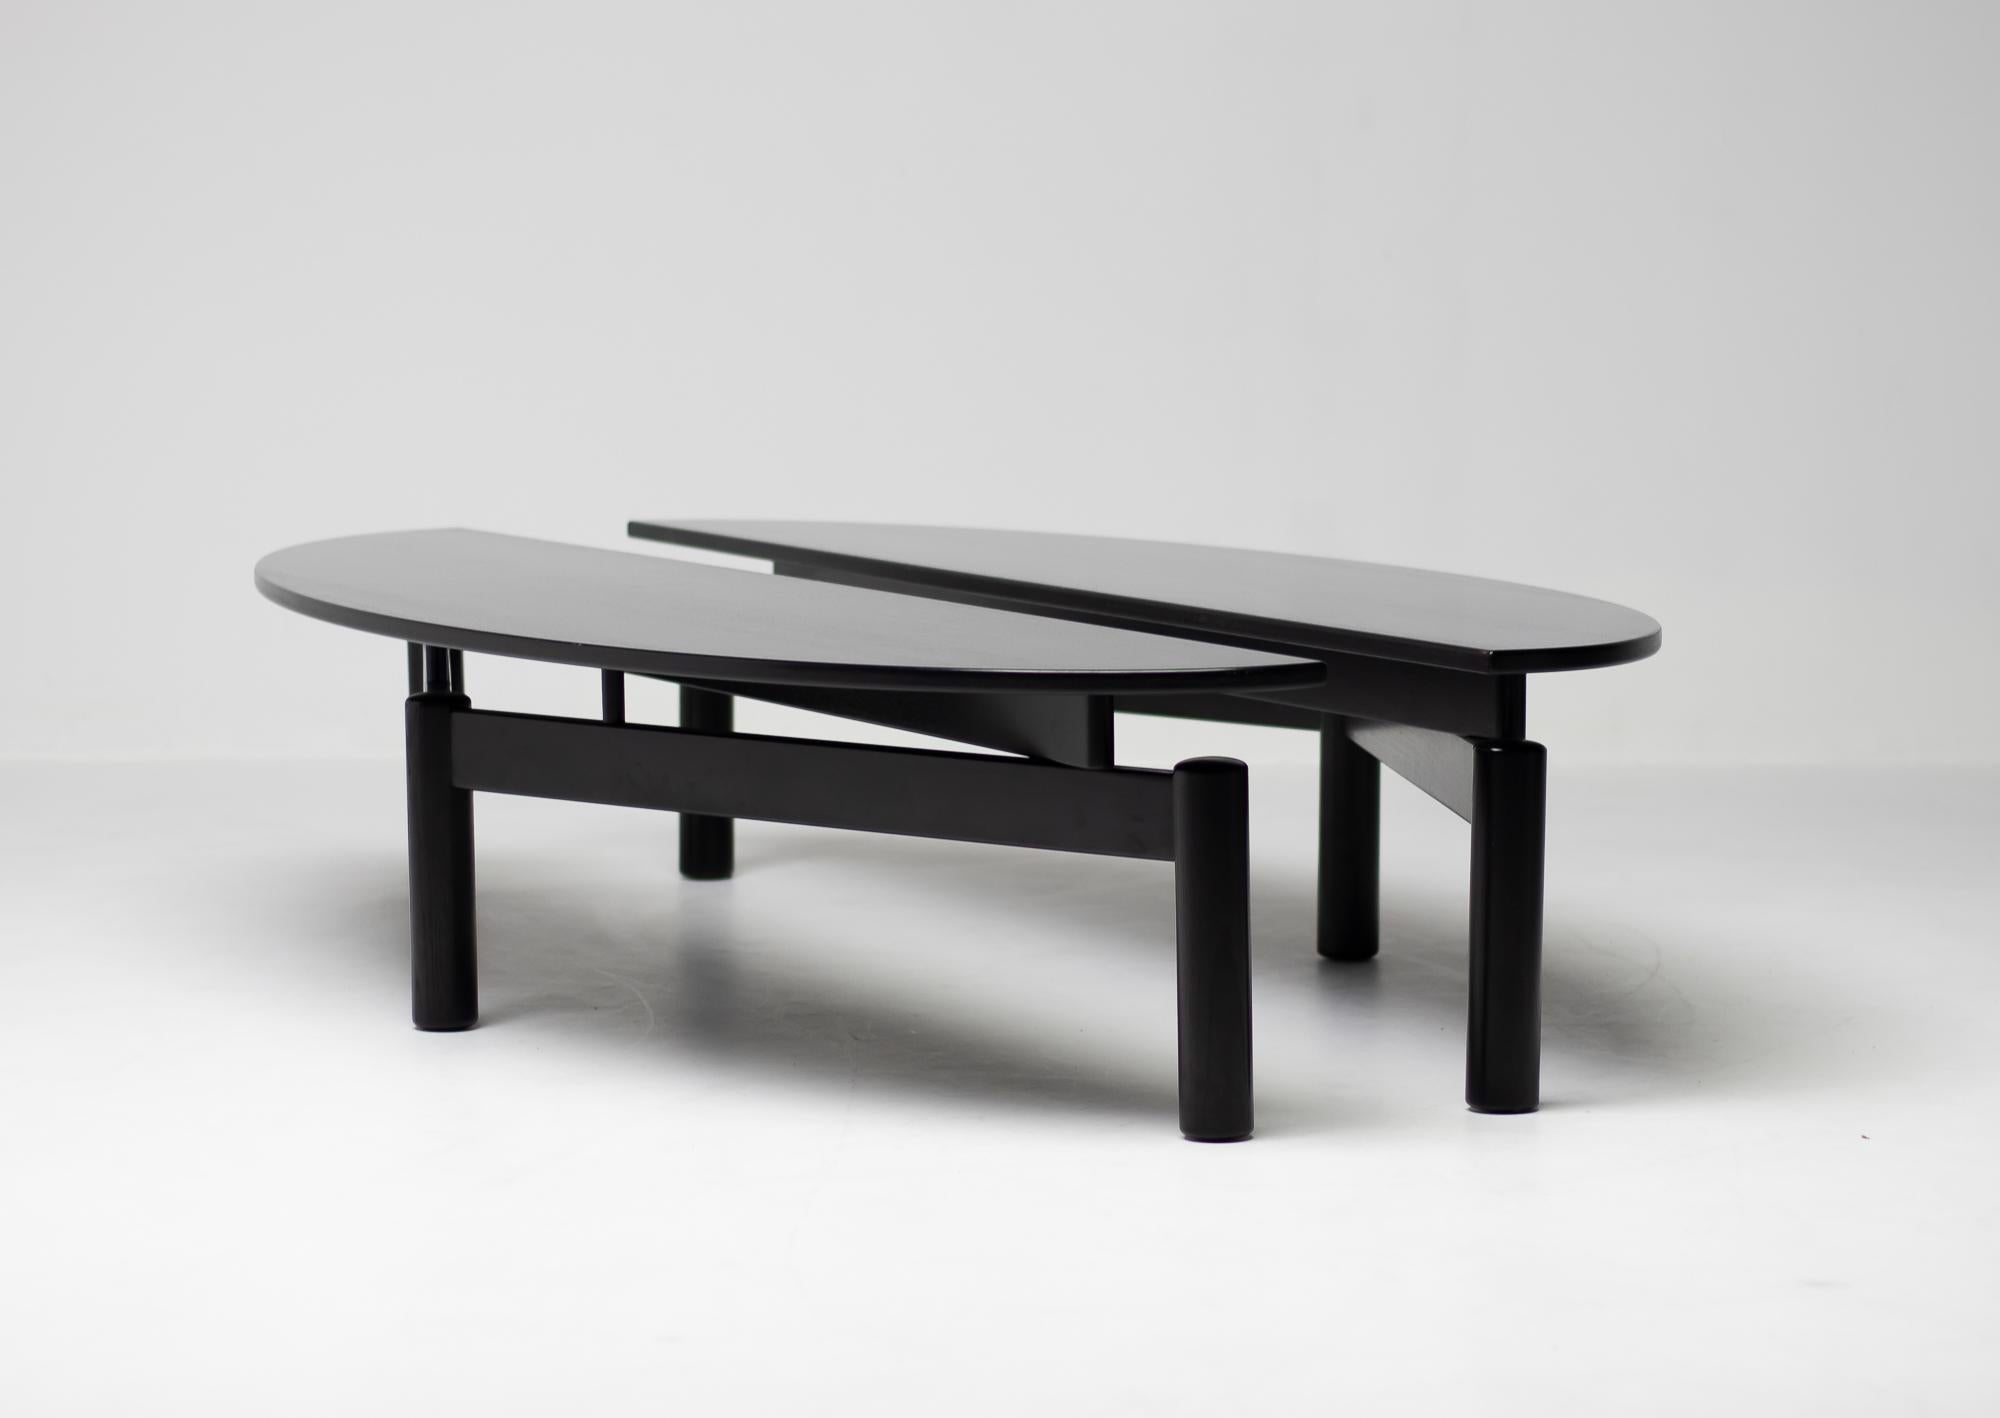 Pair of Sinbad tables designed in 1982 by Vico Magistretti for Cassina.
Black stained ash, marked with Cassina label.

Tables have demilune-shaped tops which can be configured in several interesting configurations.
They are substantial enough to